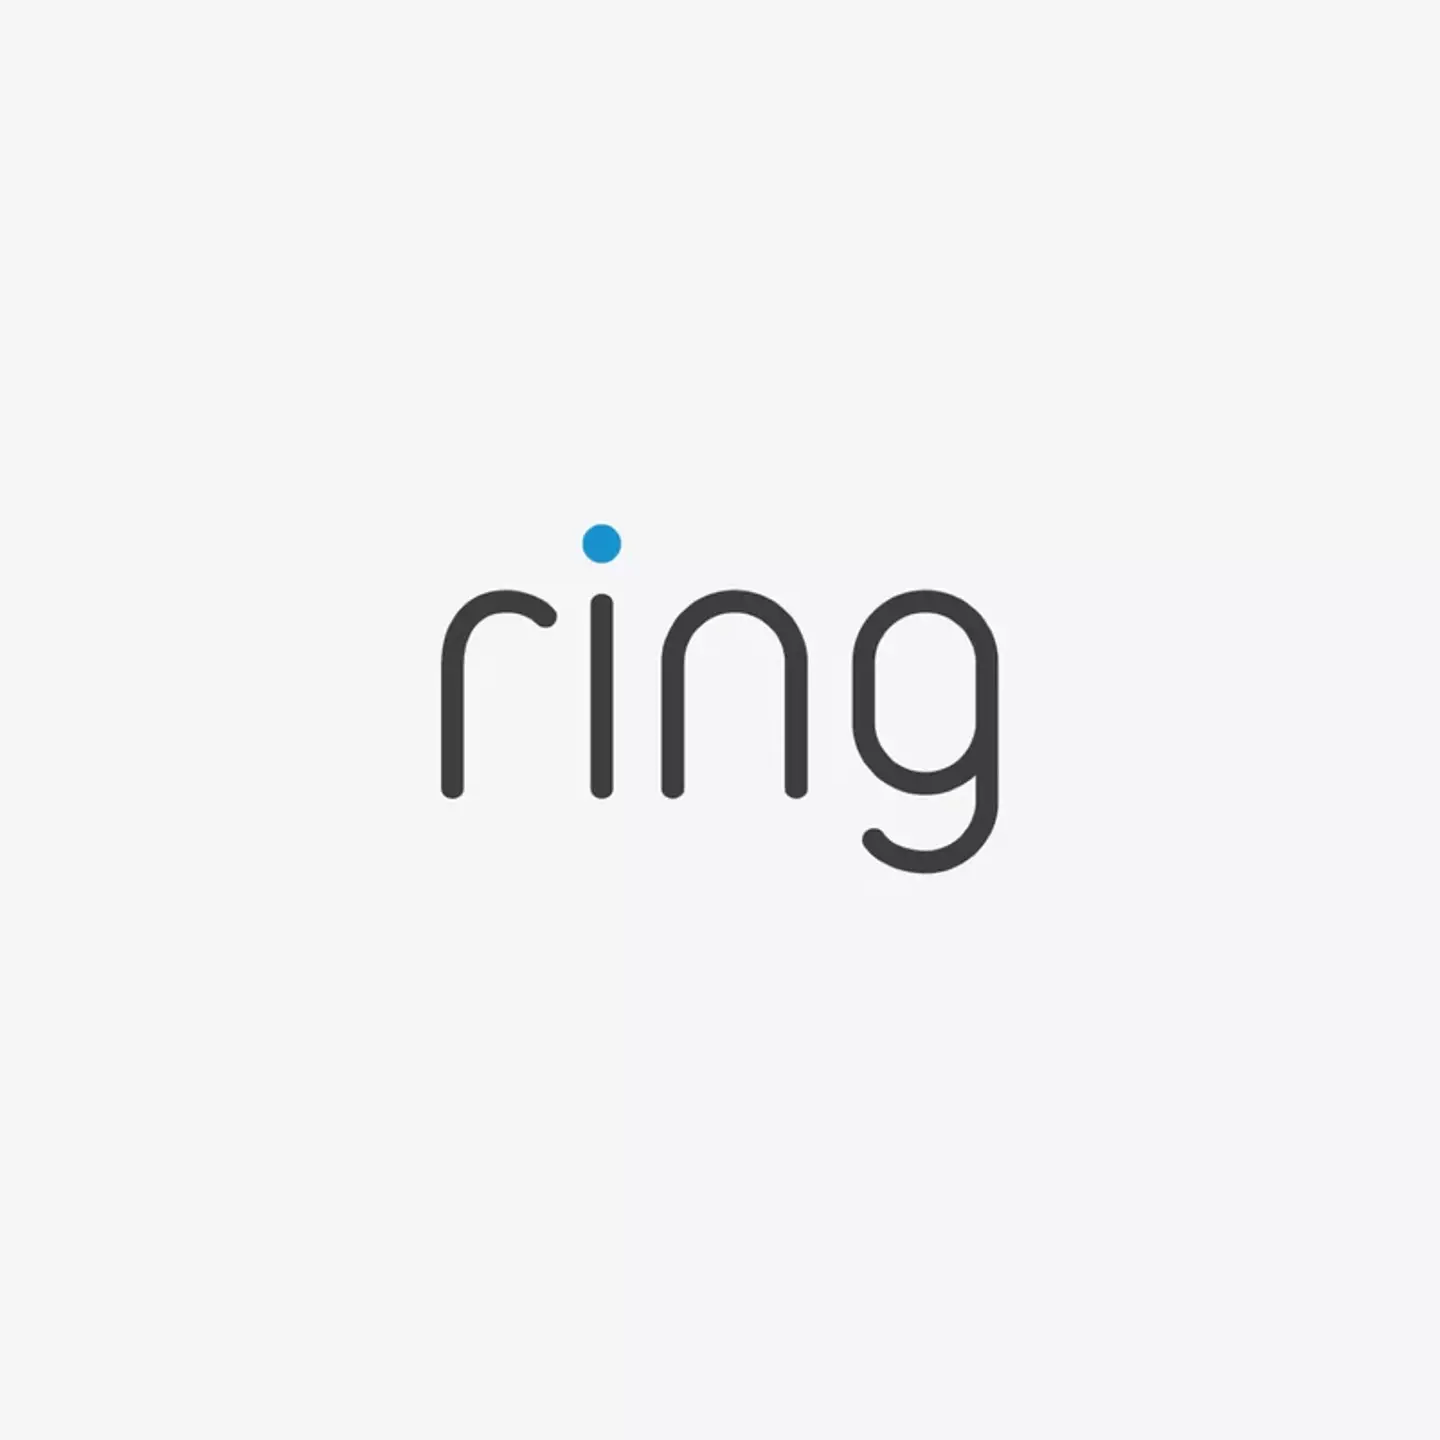 Ring doorbell customers are threatening not to renew their subscription due to a 'unjustifiable' price rise.